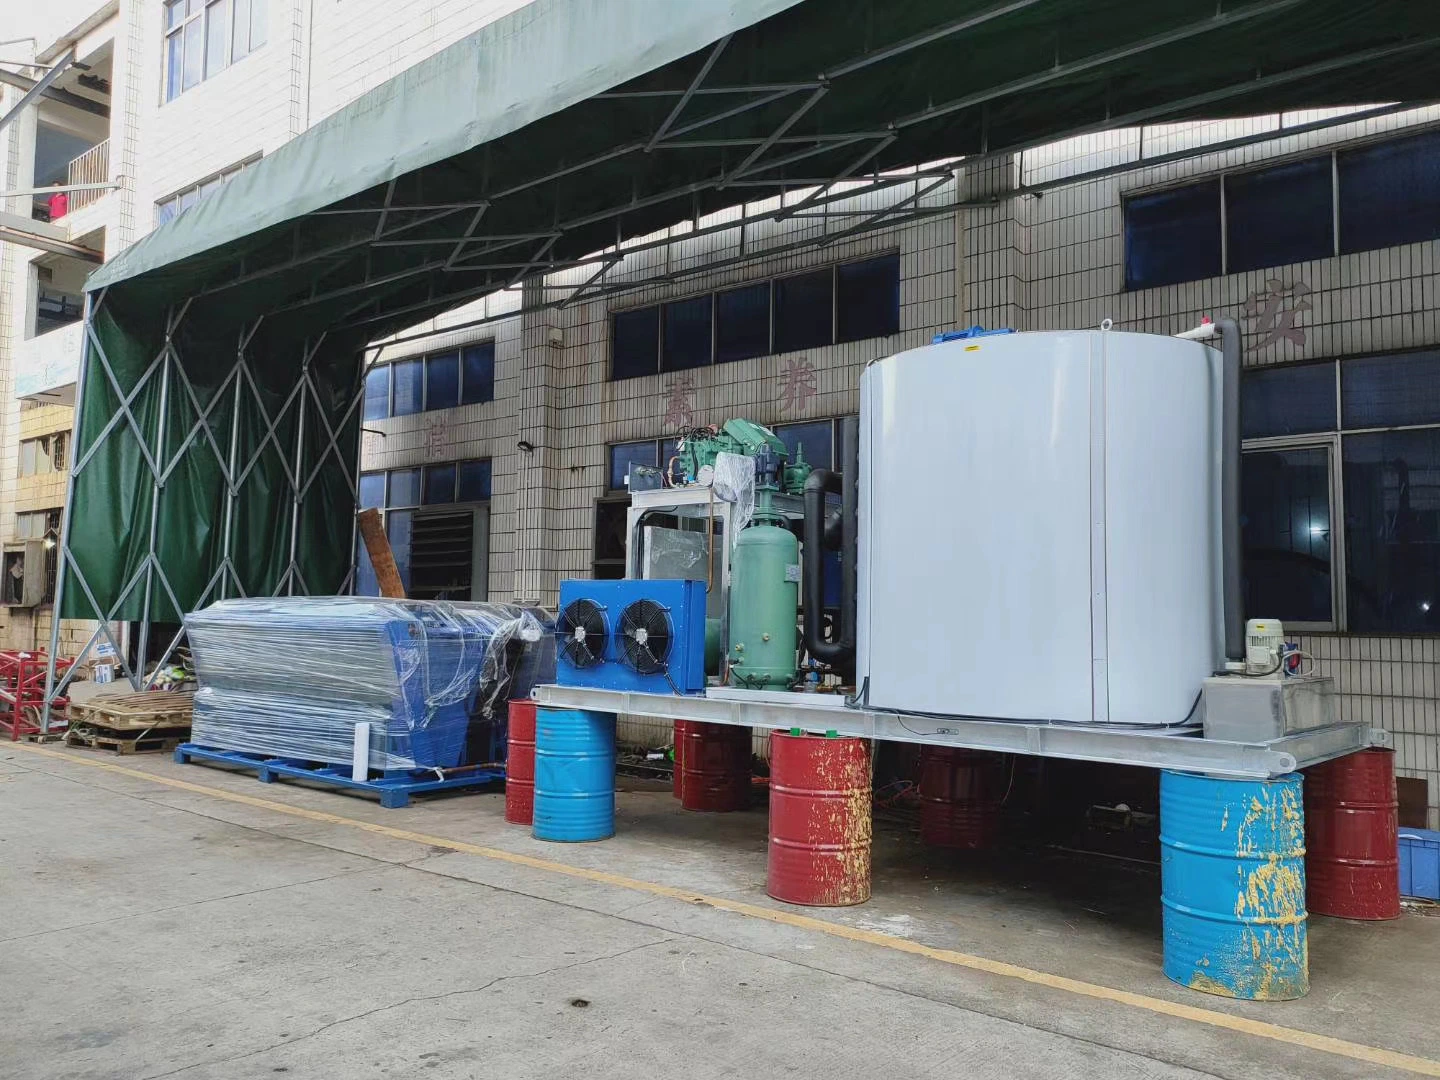 Lier Quick Ice Production, Environmental Protection, Energy Saving, Long Warranty, Intelligent Flake Ice Machine (300kg/24h-60t/24h)